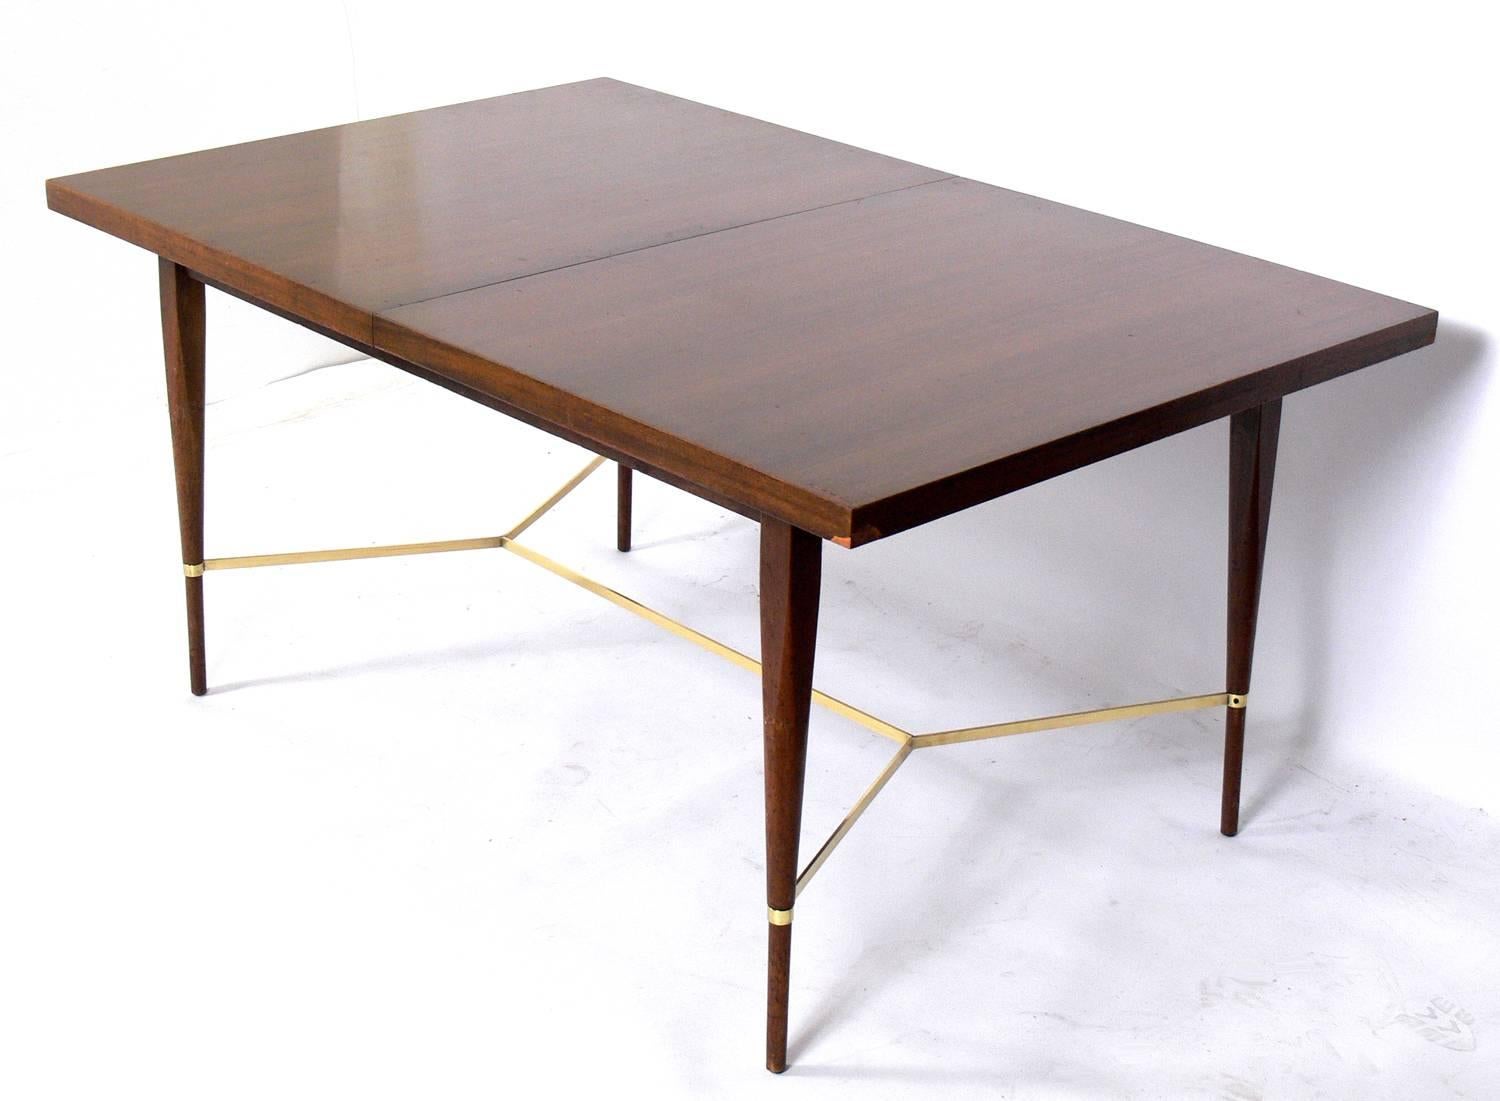 Modern dining table, designed by Paul McCobb for Calvin, American, circa 1950s. This table is currently being refinished, and can be completed in your choice of color. The price noted below inlcudes refinishing in your choice of color. The brass